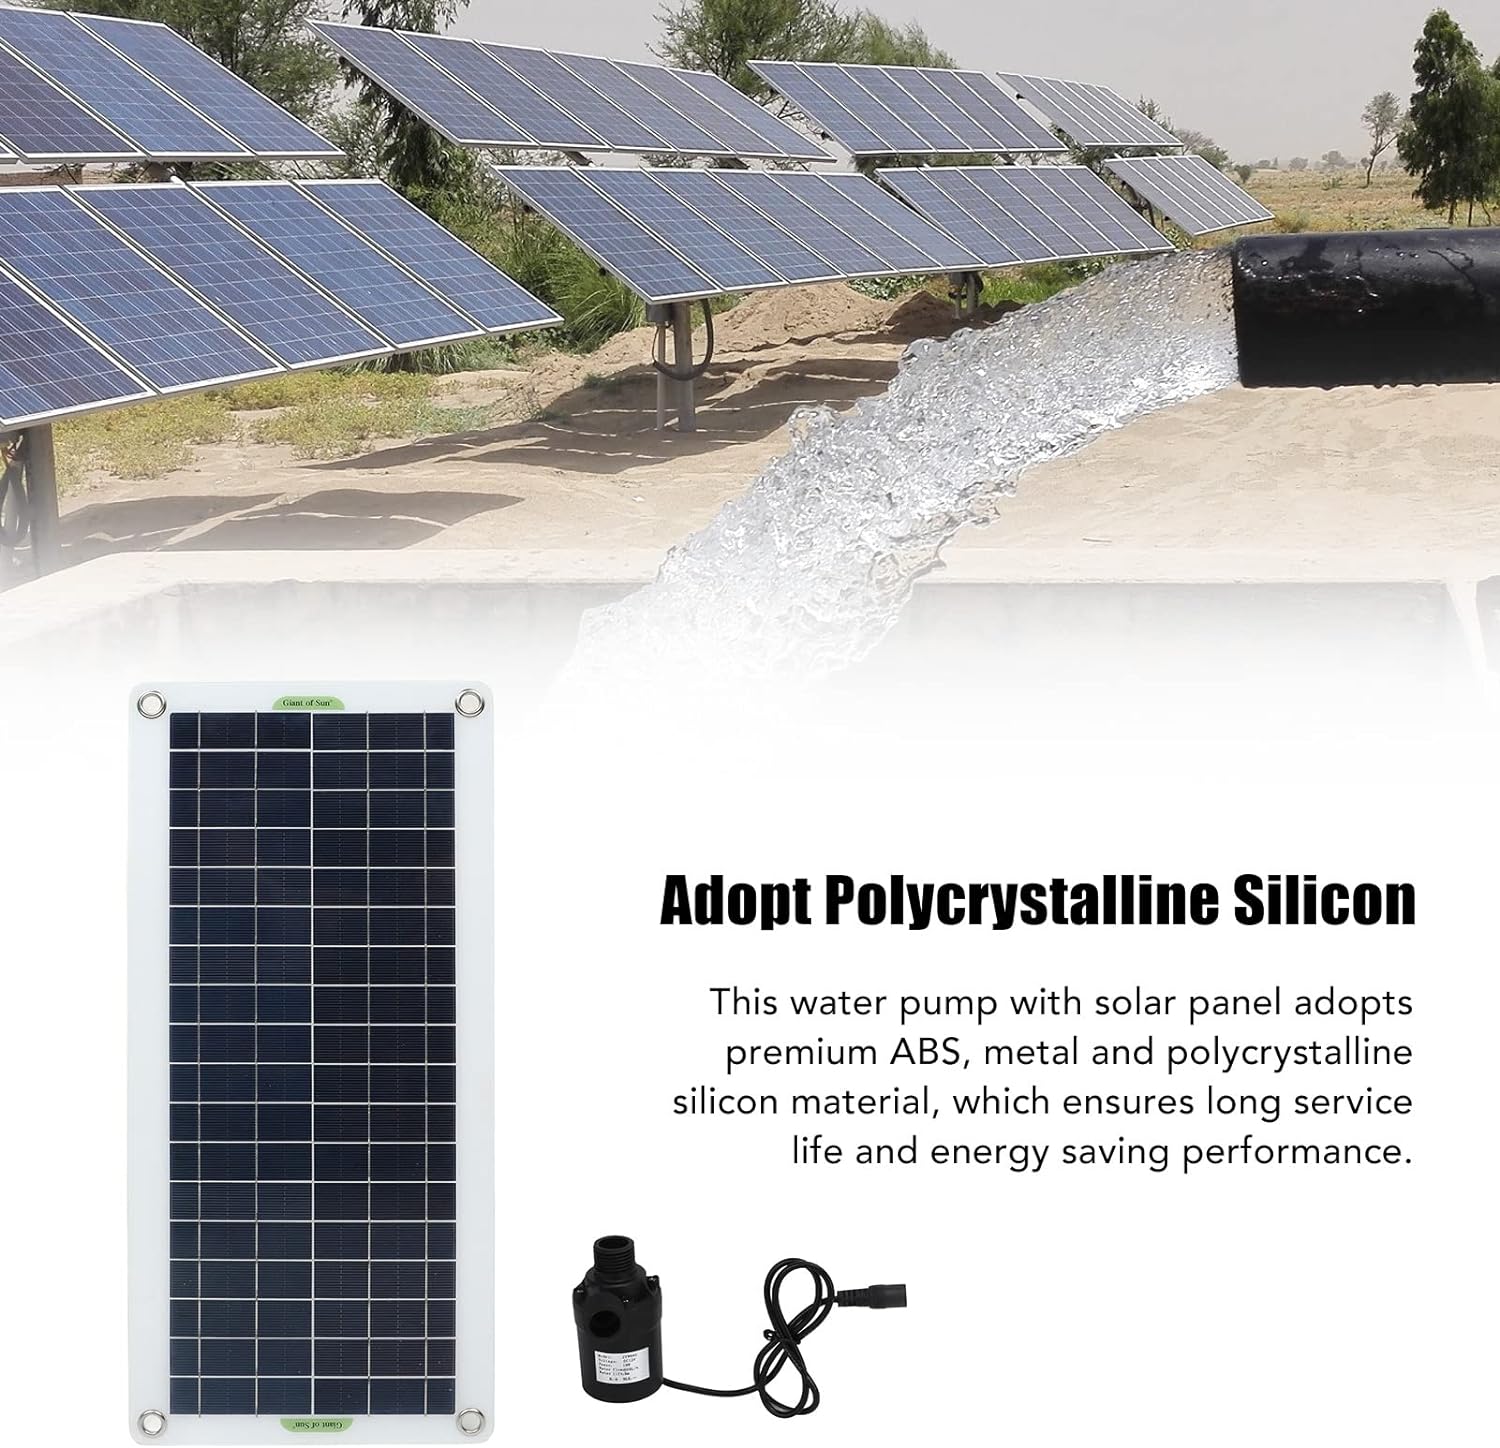 Aramox Solar Water Pump Kit, Solar Water Pump Kit 30W Polycrystalline Silicon 800L Per Hour Solar Power Water Pump for RV Greenhouse Camping